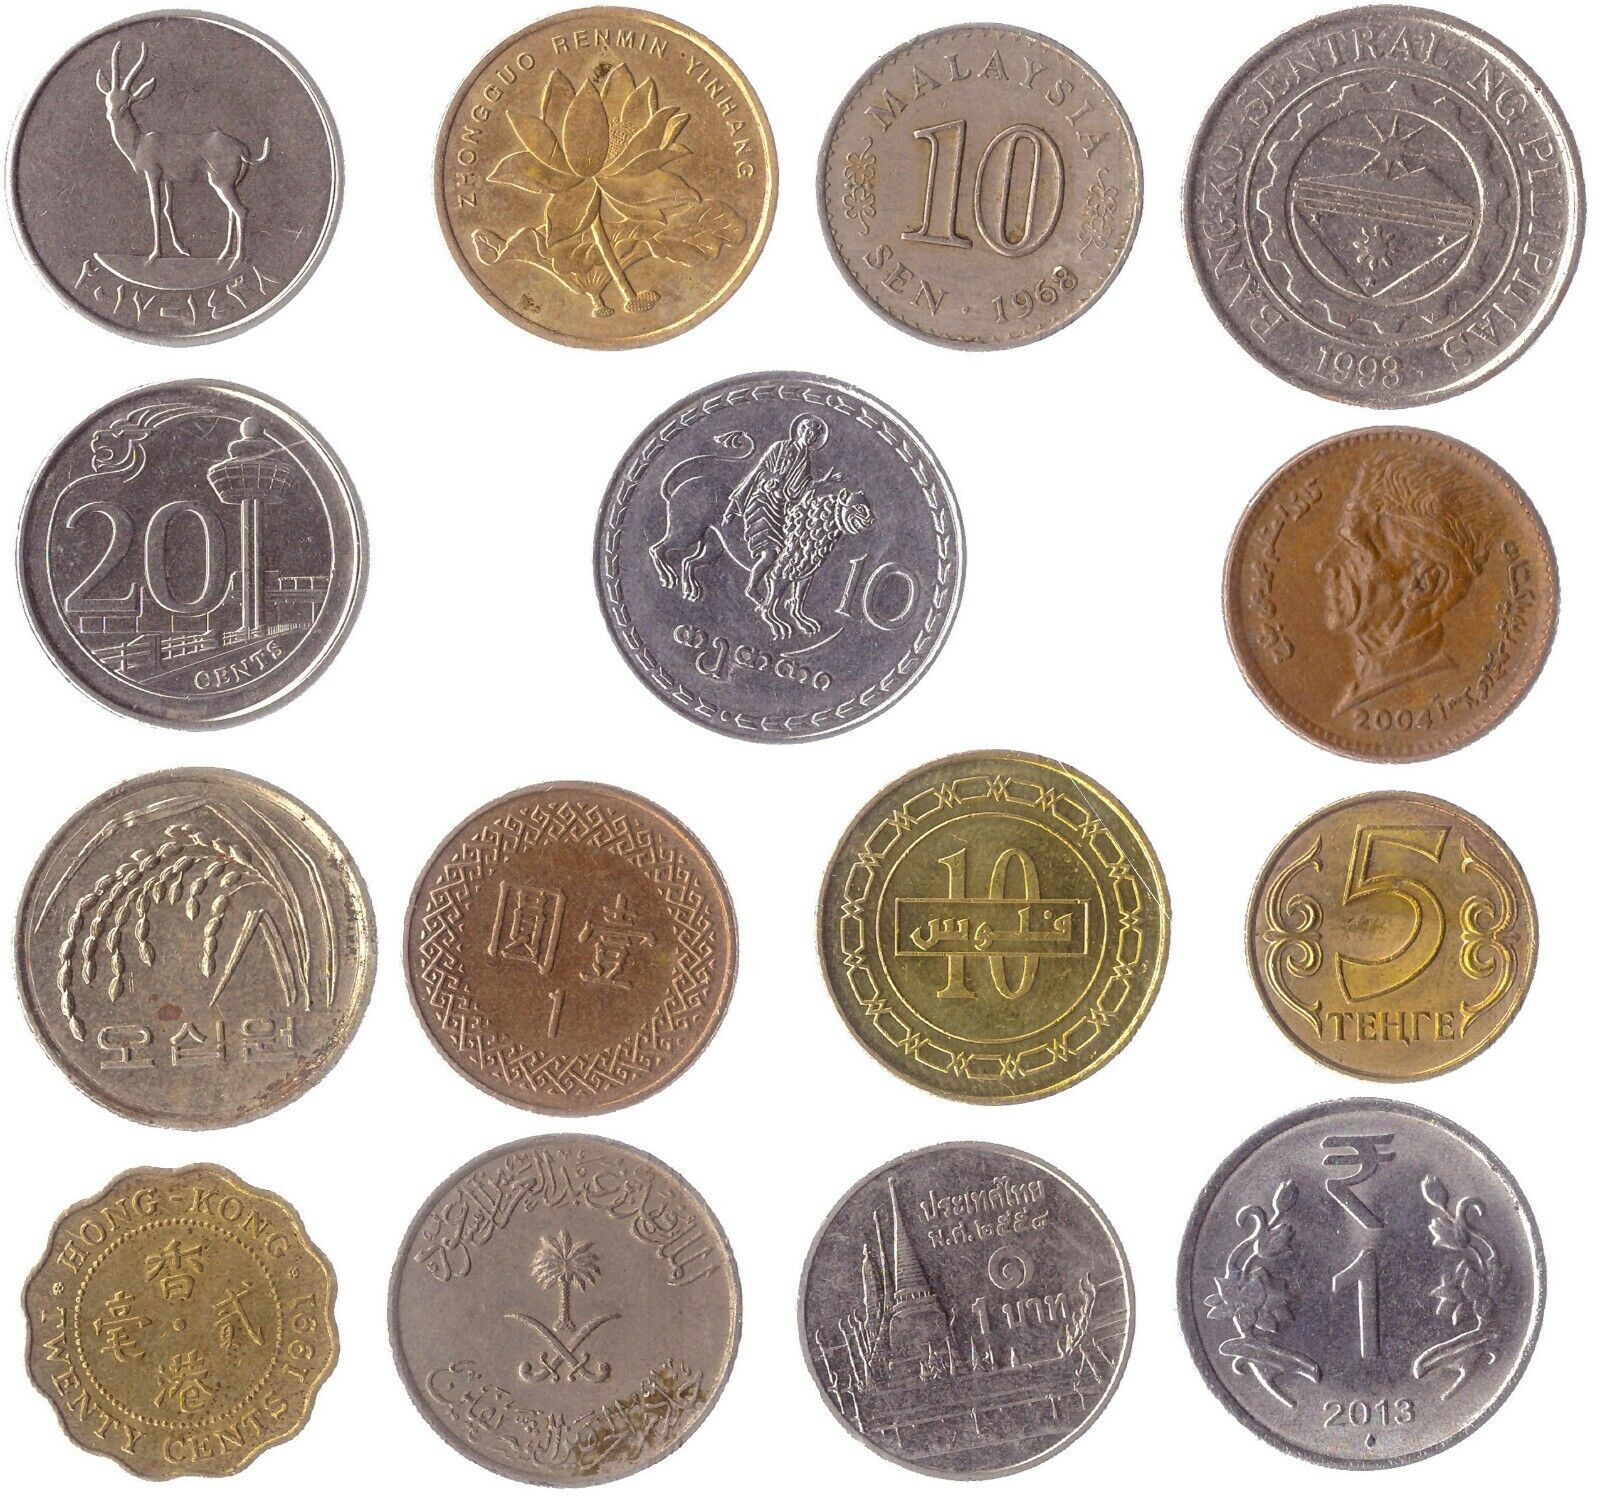 25 COINS FROM DIFFERENT ASIAN COUNTRIES. OLD VALUABLE COLLECTIBLE COINS.  Без бренда - фотография #3